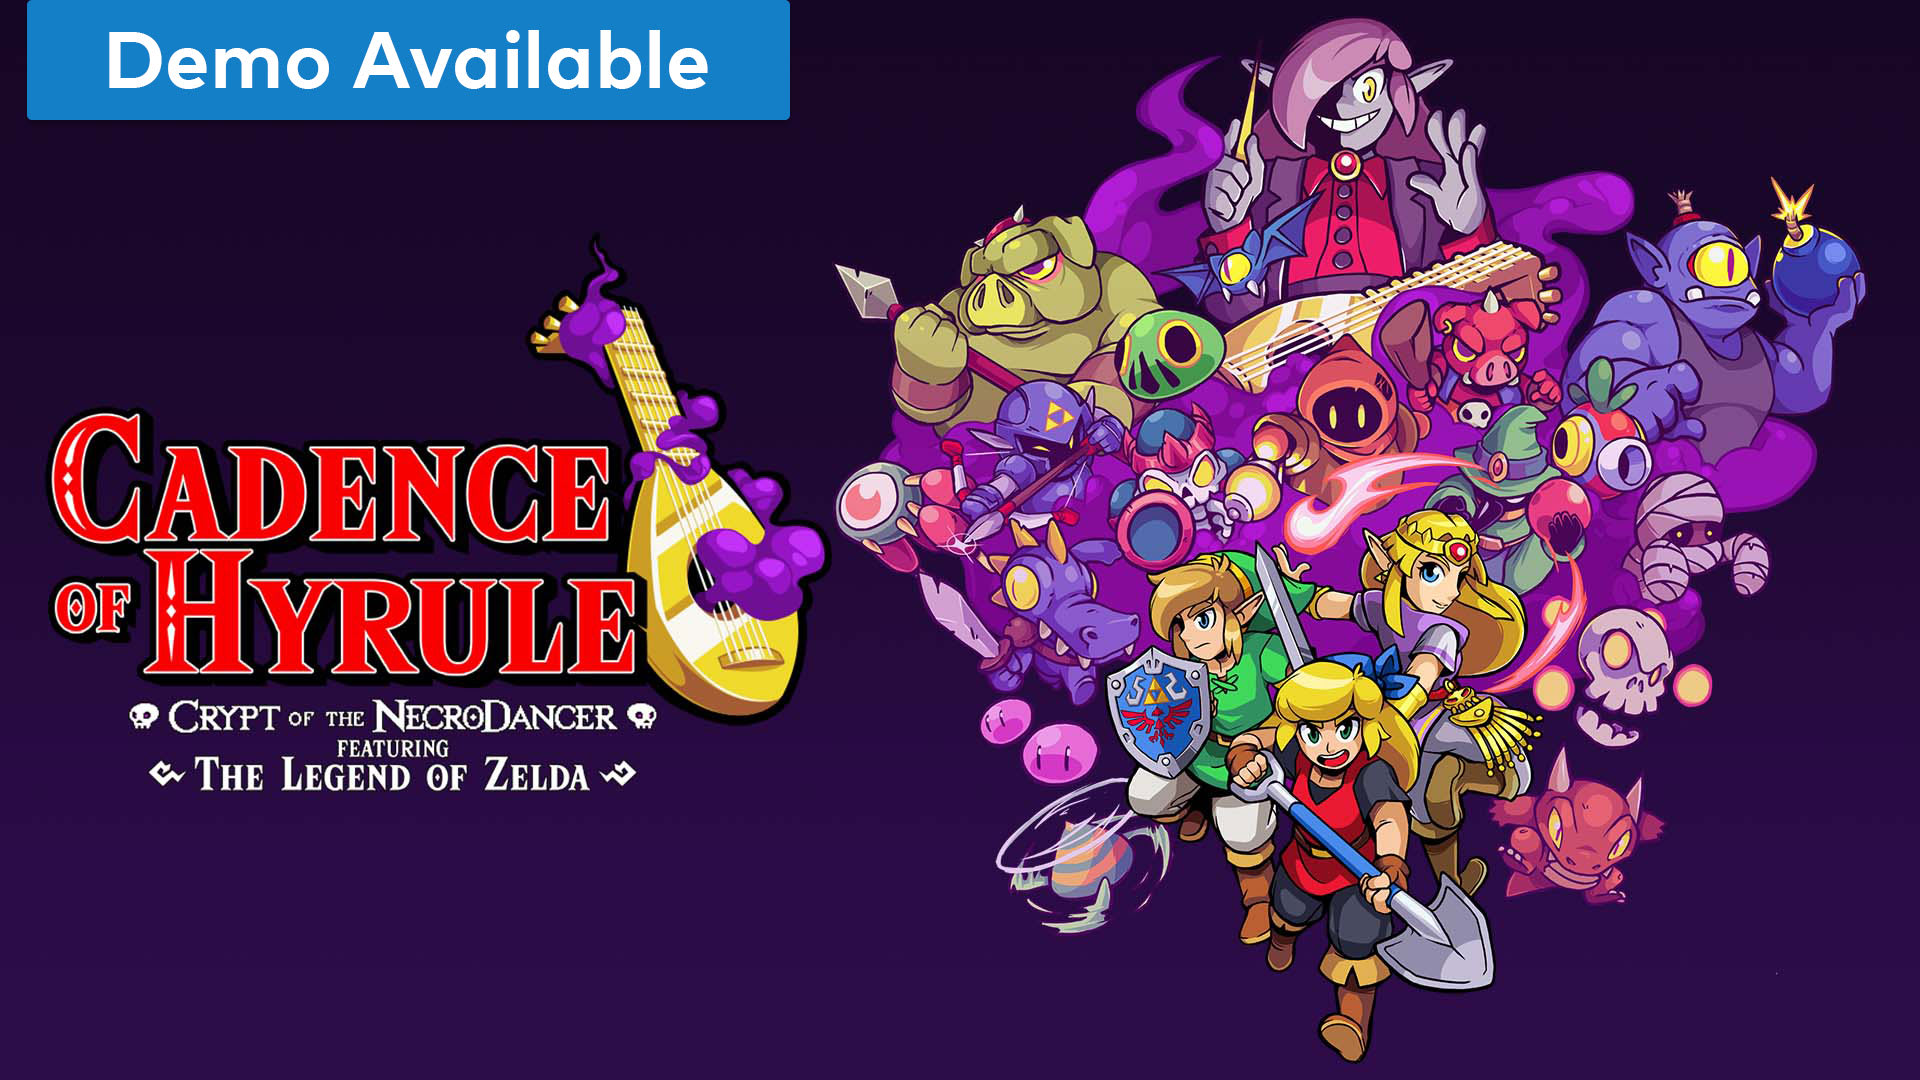 Cadence of Hyrule: Crypt of the NecroDancer Featuring The Legend of Zelda (Nintendo Switch Digital Download) $17.49